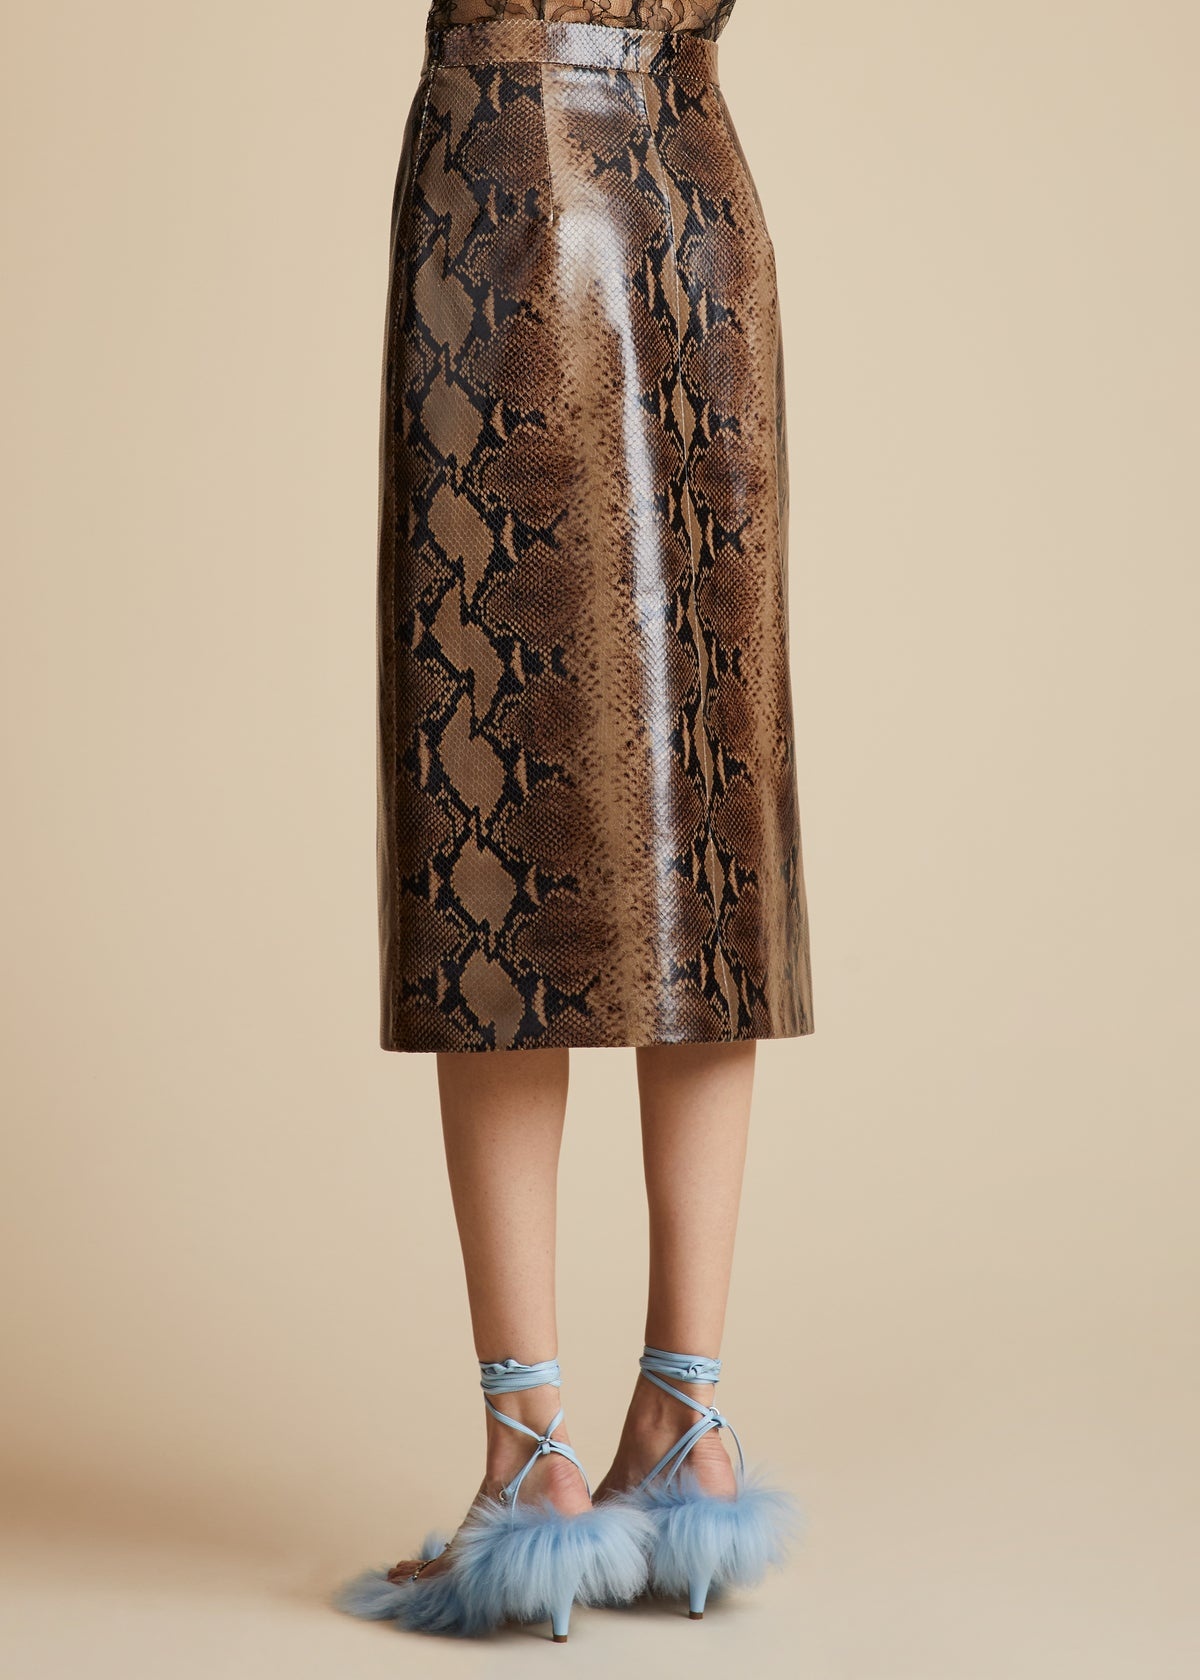 The Fraser Skirt in Brown Python-Embossed Leather - 3